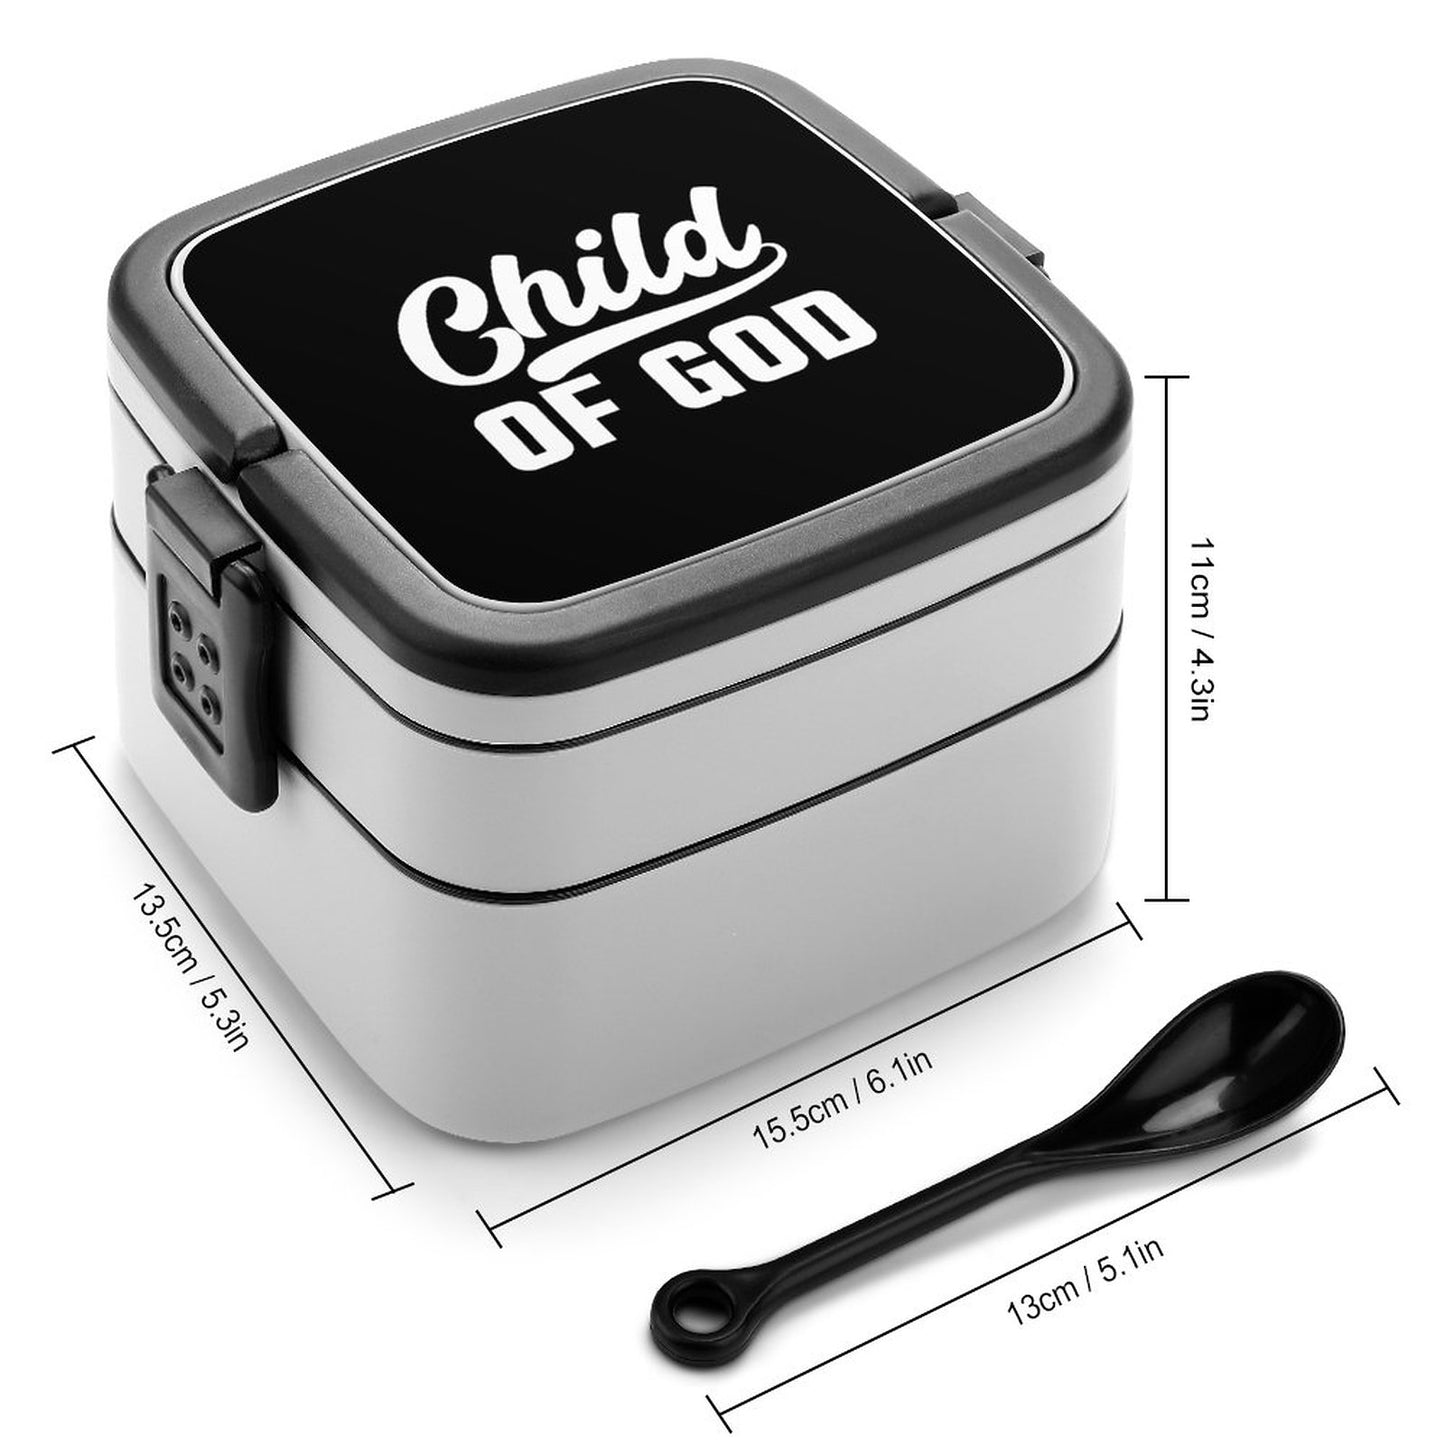 CHILD OF GOD 2-Tier Stackable Bento Lunch Box unique Christian Gift For the everyday Christian SALE-Personal Design